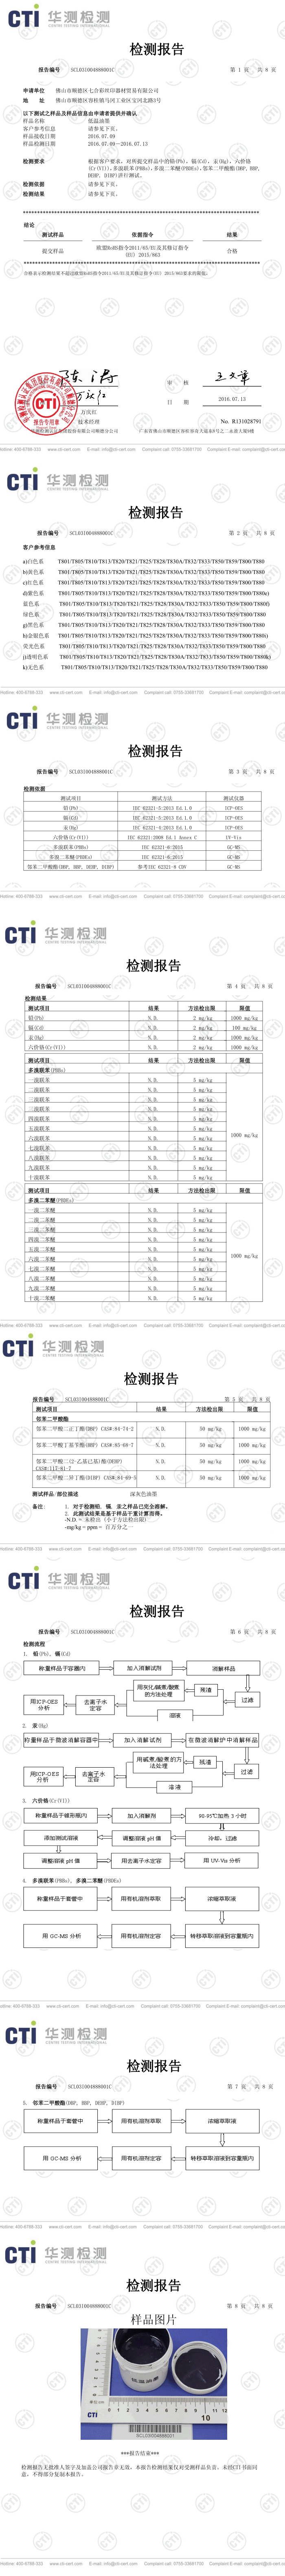 Seven Lottery 2016 ROHS Comprehensive Report Chinese